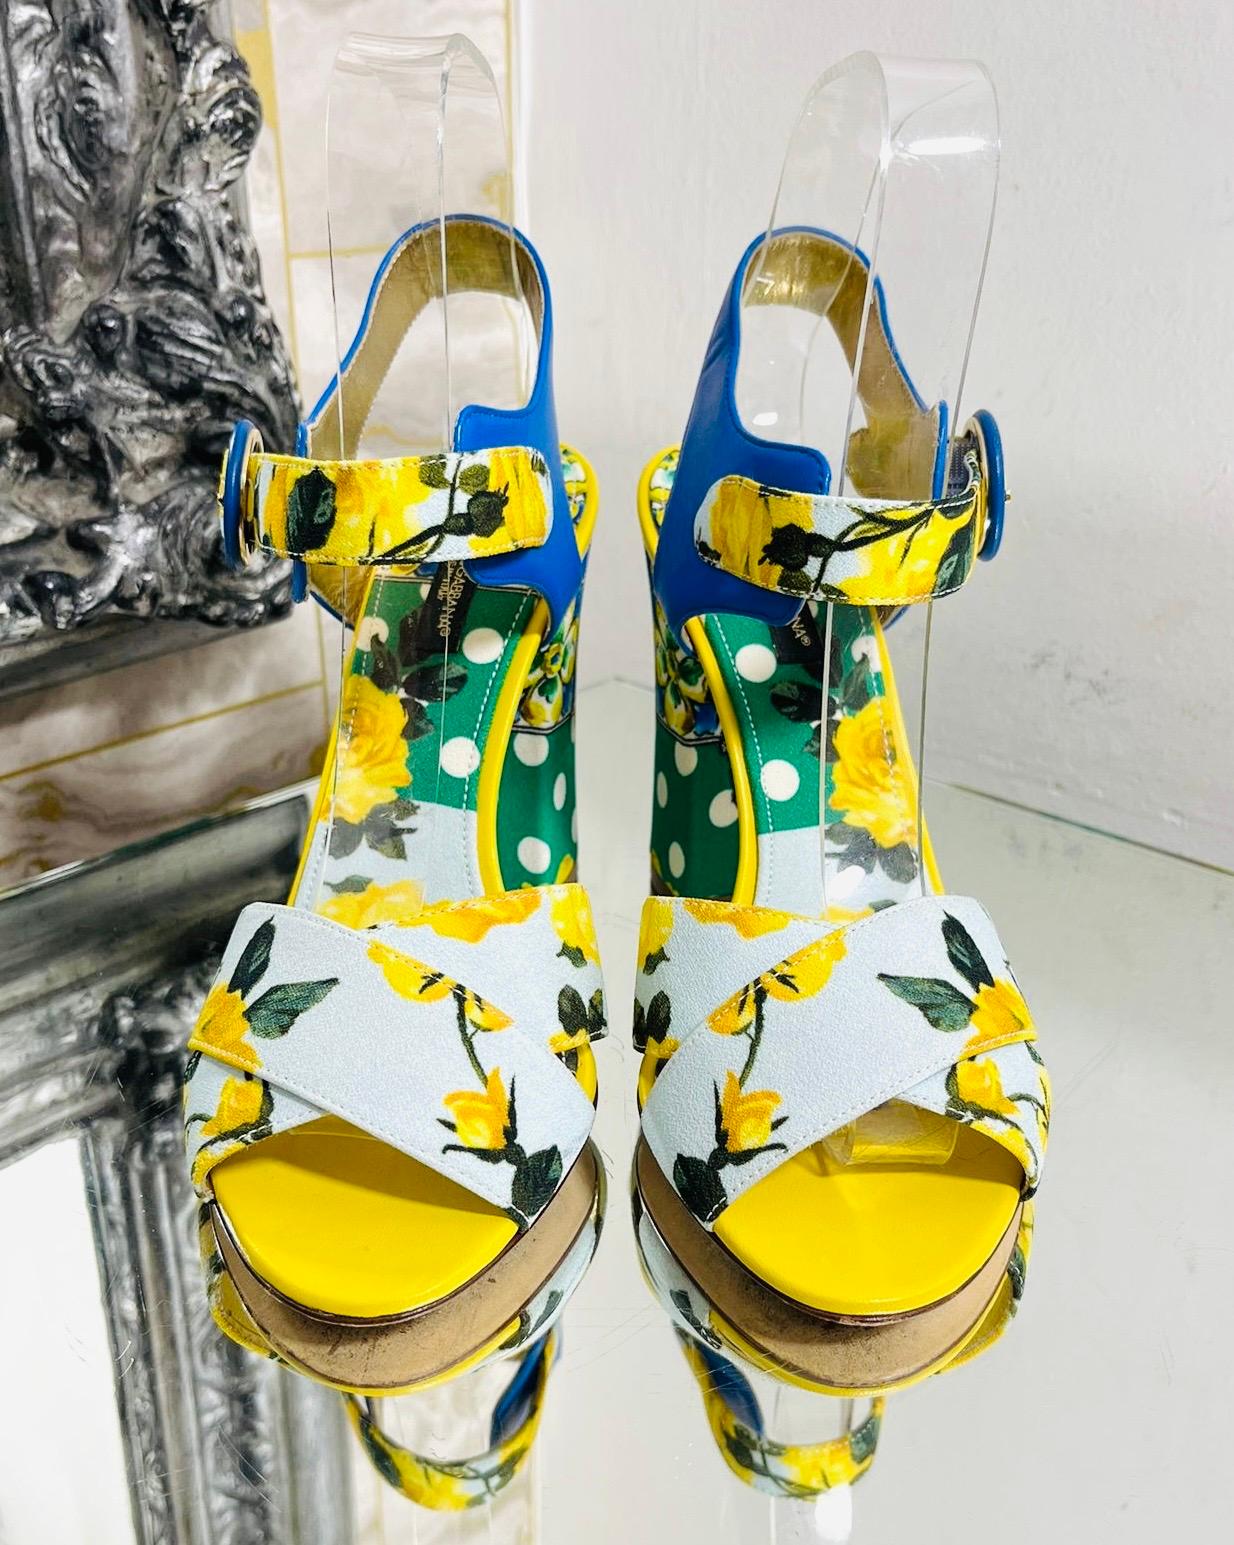 Dolce & Gabbana Floral Print Sandals

Multicoloured heels styled with Mediterranean-themed patterns.

Featuring criss-cross straps and adjustable buckle fastening.

Detailed with polka-dot block heel, open toes and slingback design.

Size –